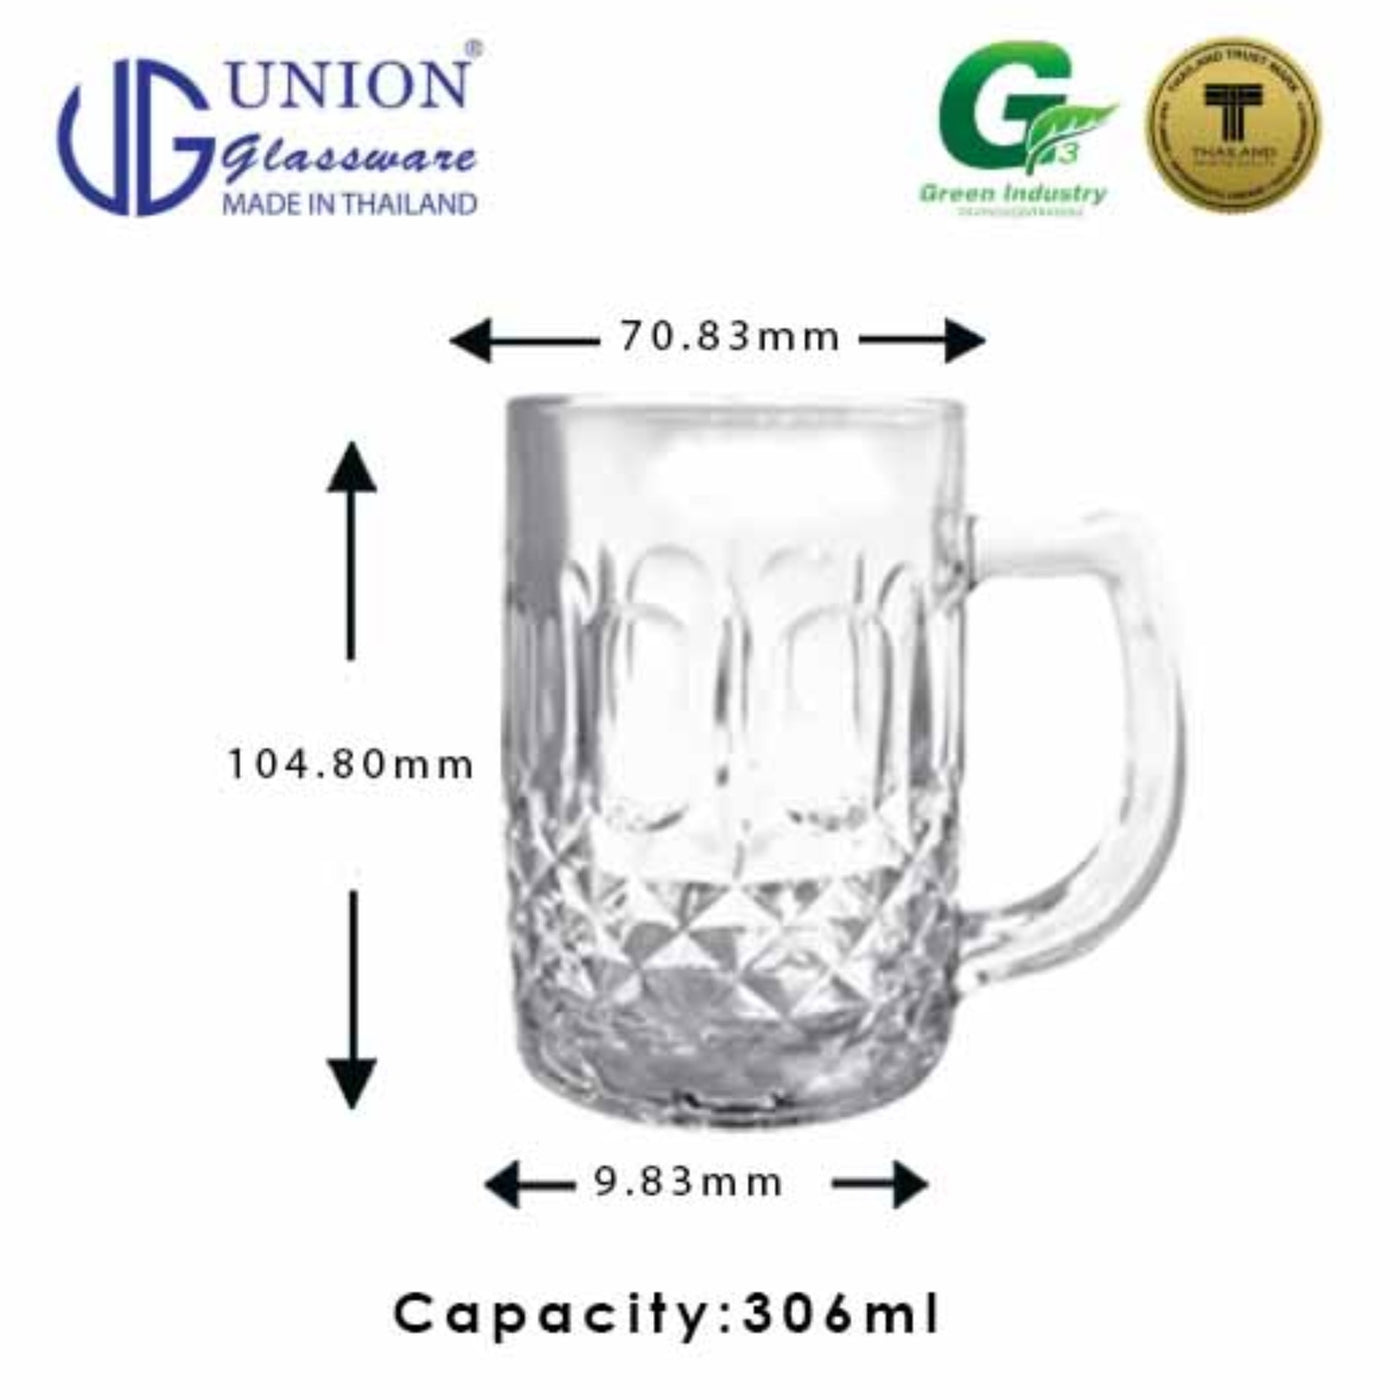 UNION GLASS Thailand Premium Clear Glass Beer Mug  Beer Lovers 306ml Set of 6 Amazing Gift Idea For Any Occasion!